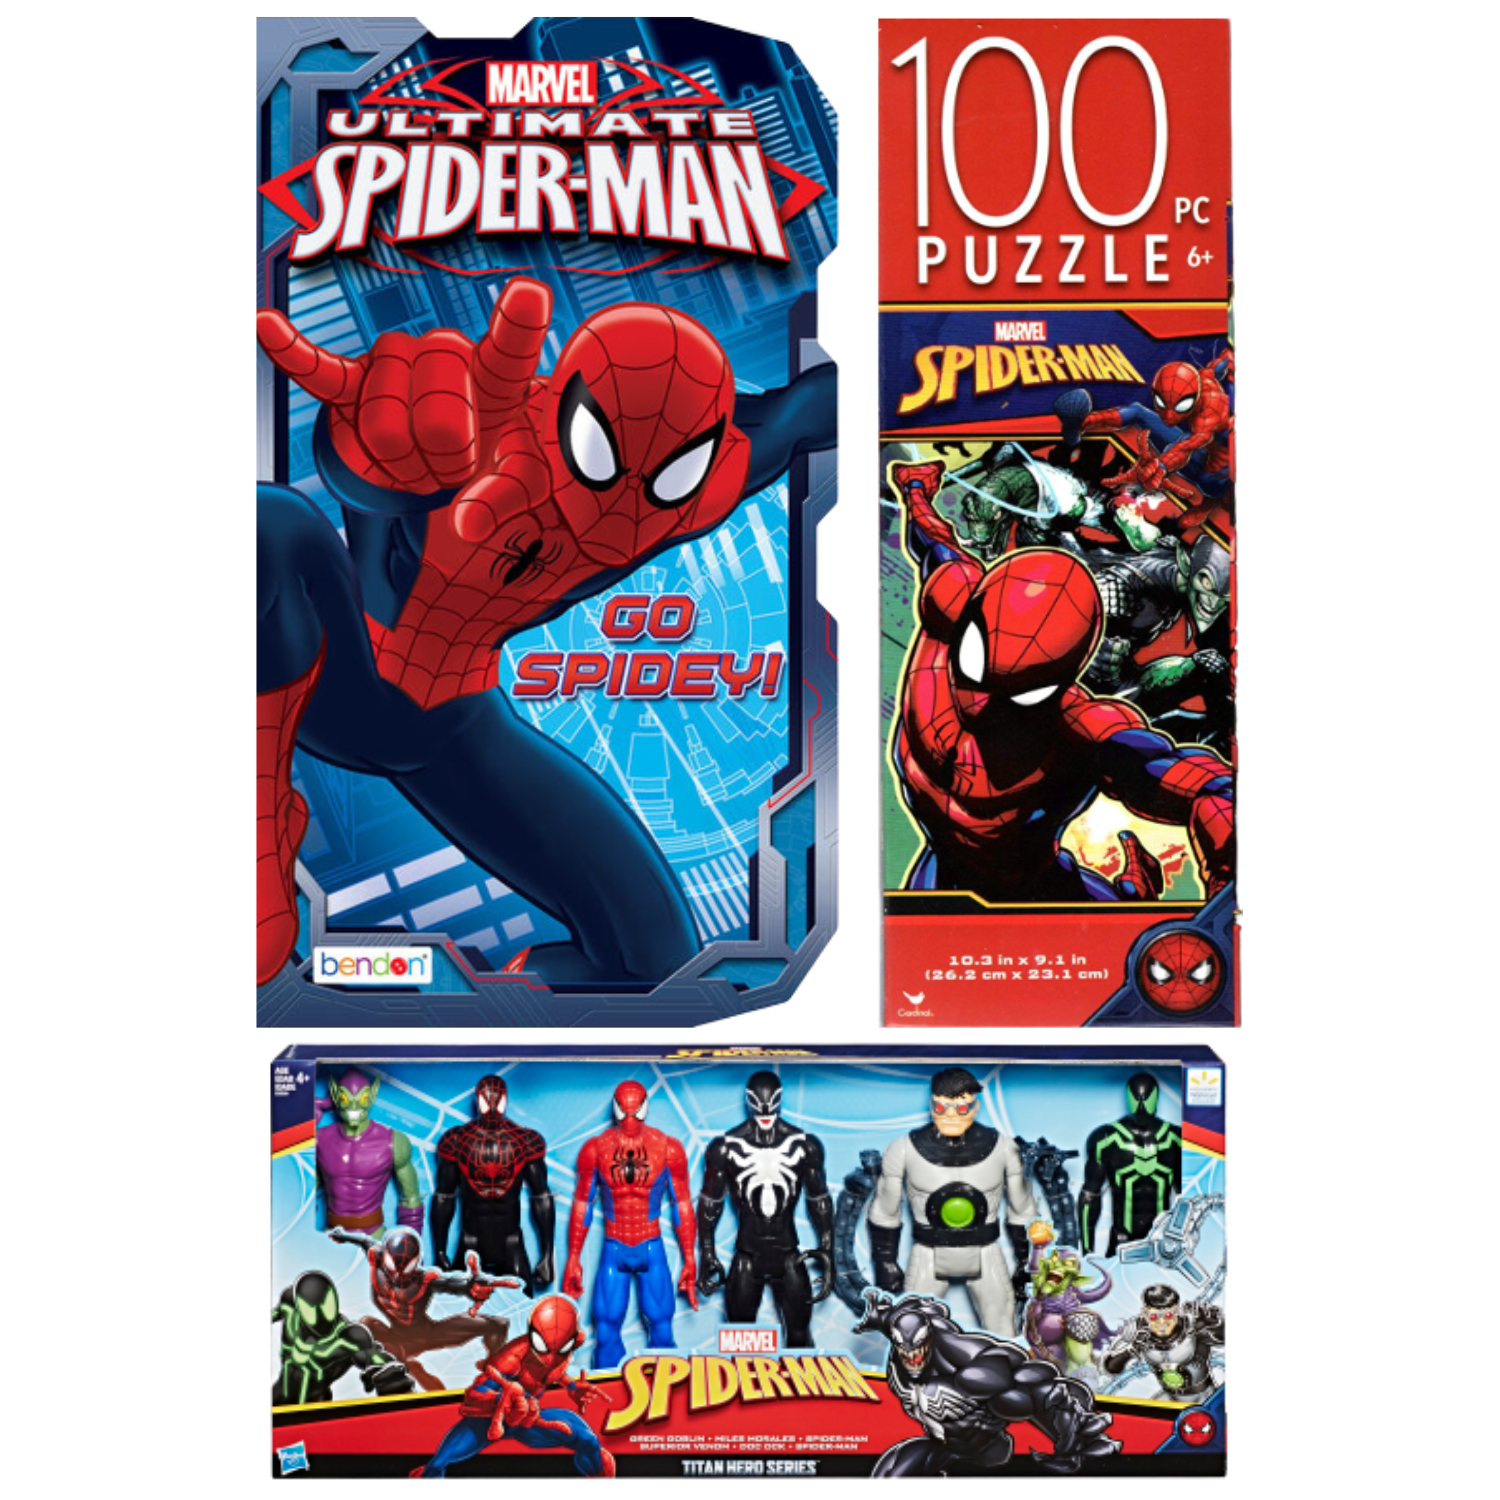 MARVEL SPIDER-MAN,3 PACK BOARD GAME SET,WITH 5 SPIDERMAN BOARD